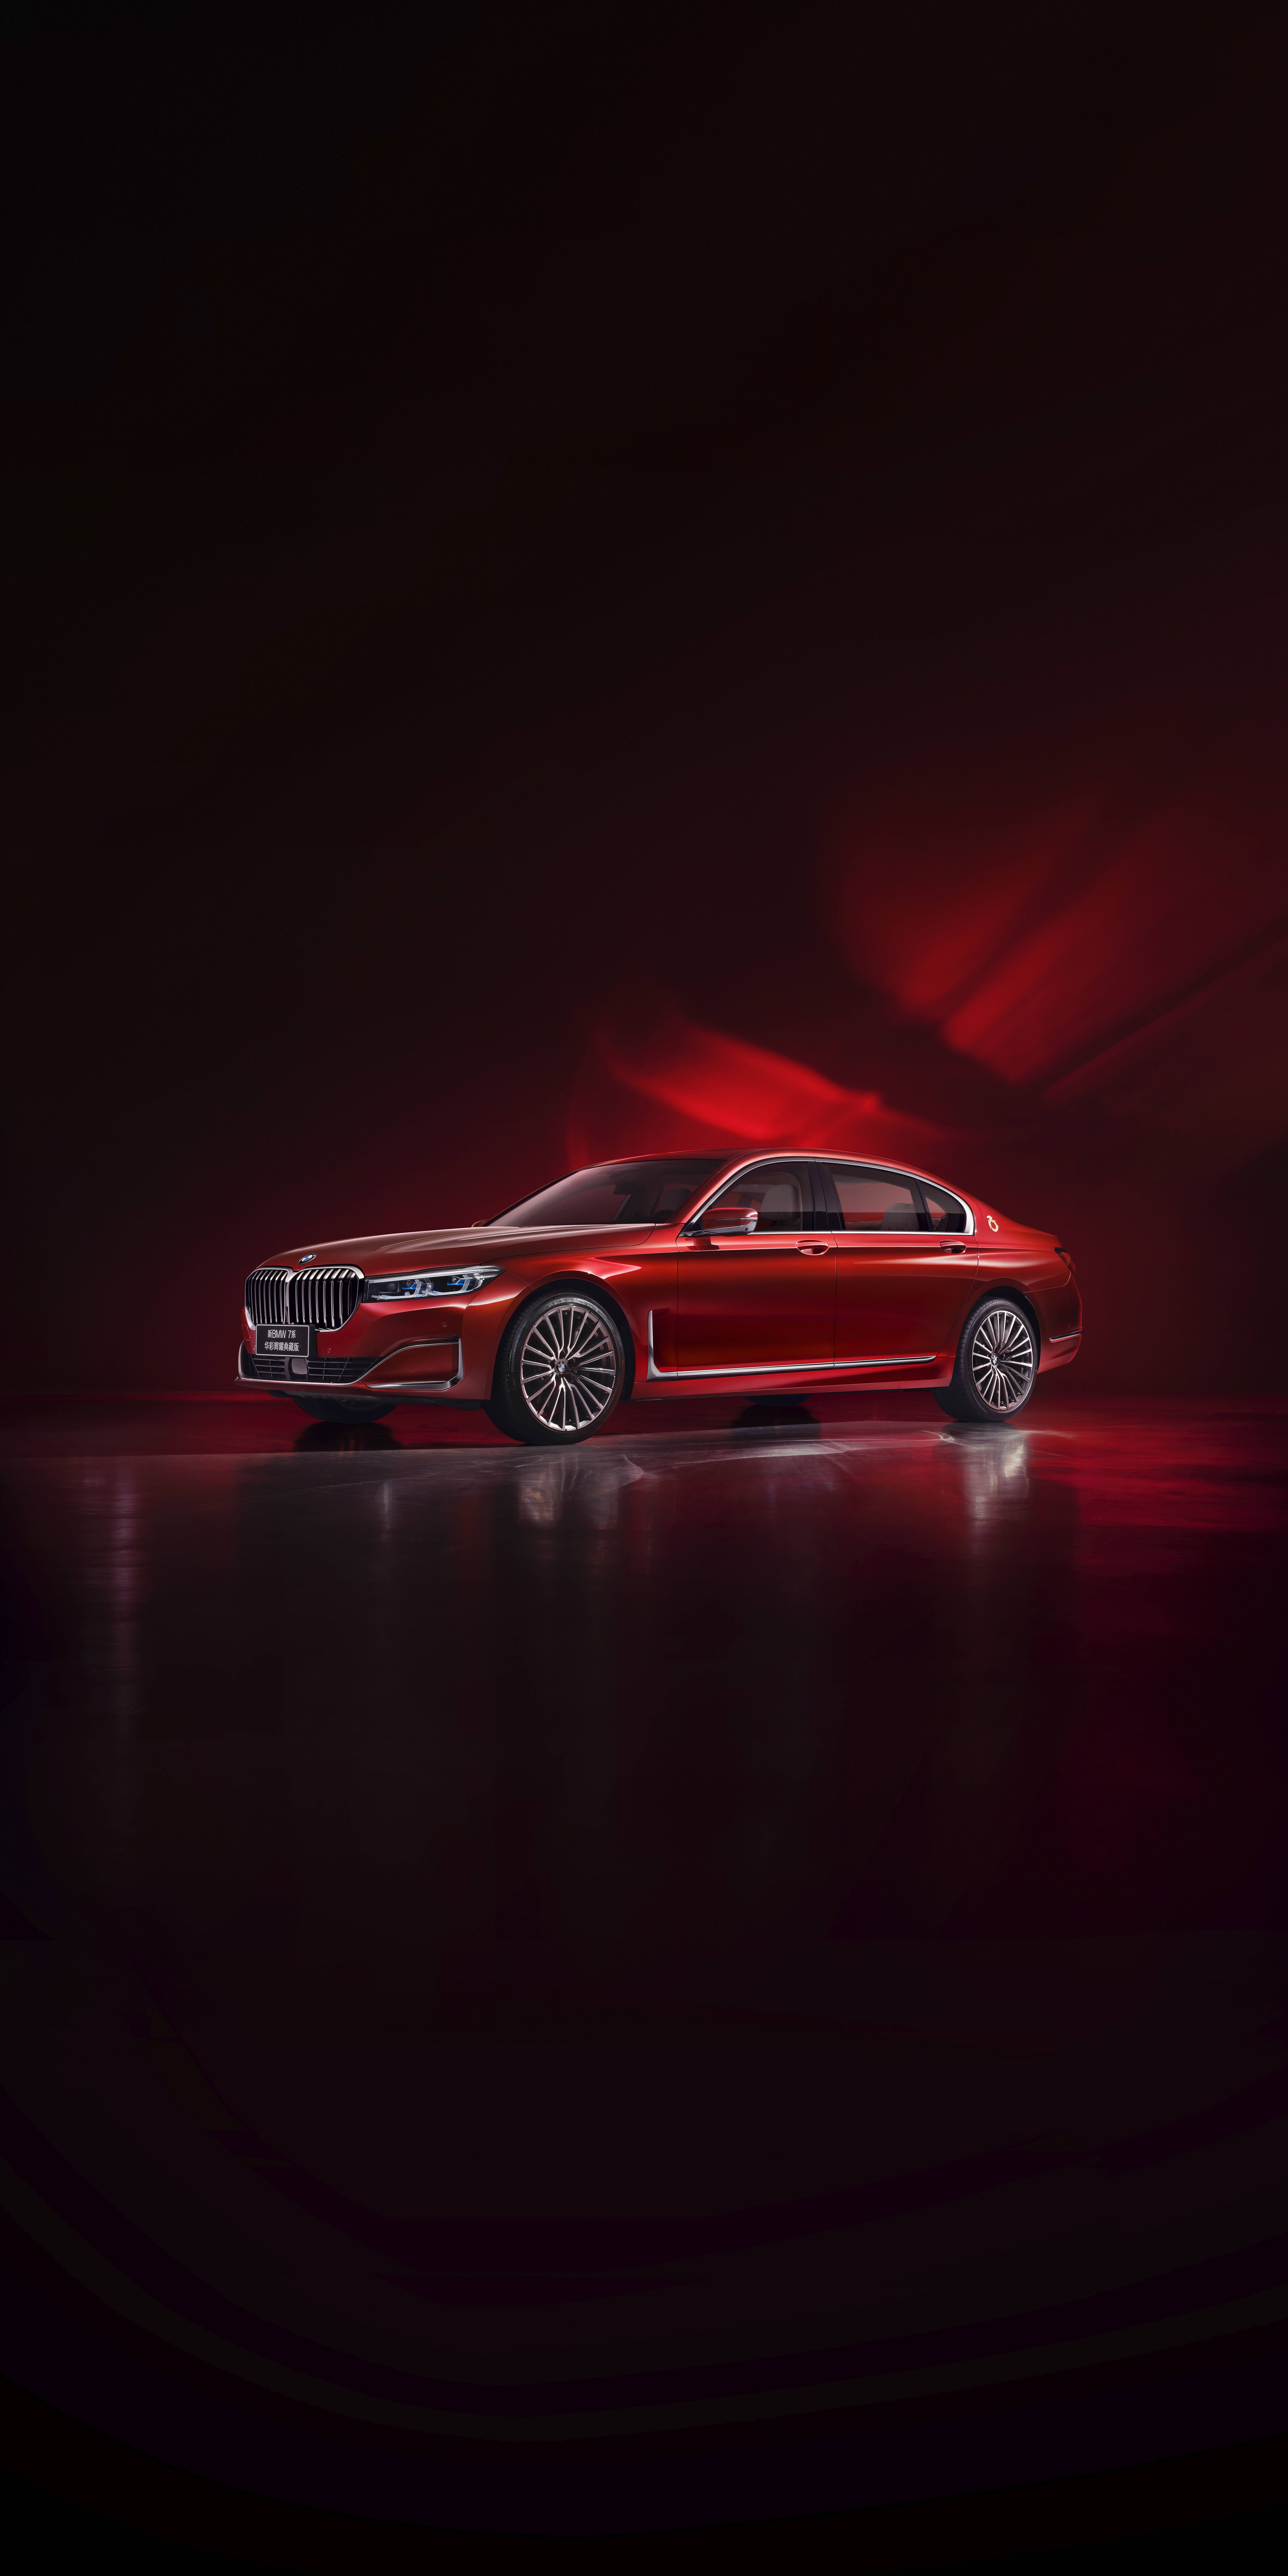 BMW 7 Series ''Radiant Cadenza Immaculate Edition''. Car wallpaper, Bmw 7 series, Automotive photography